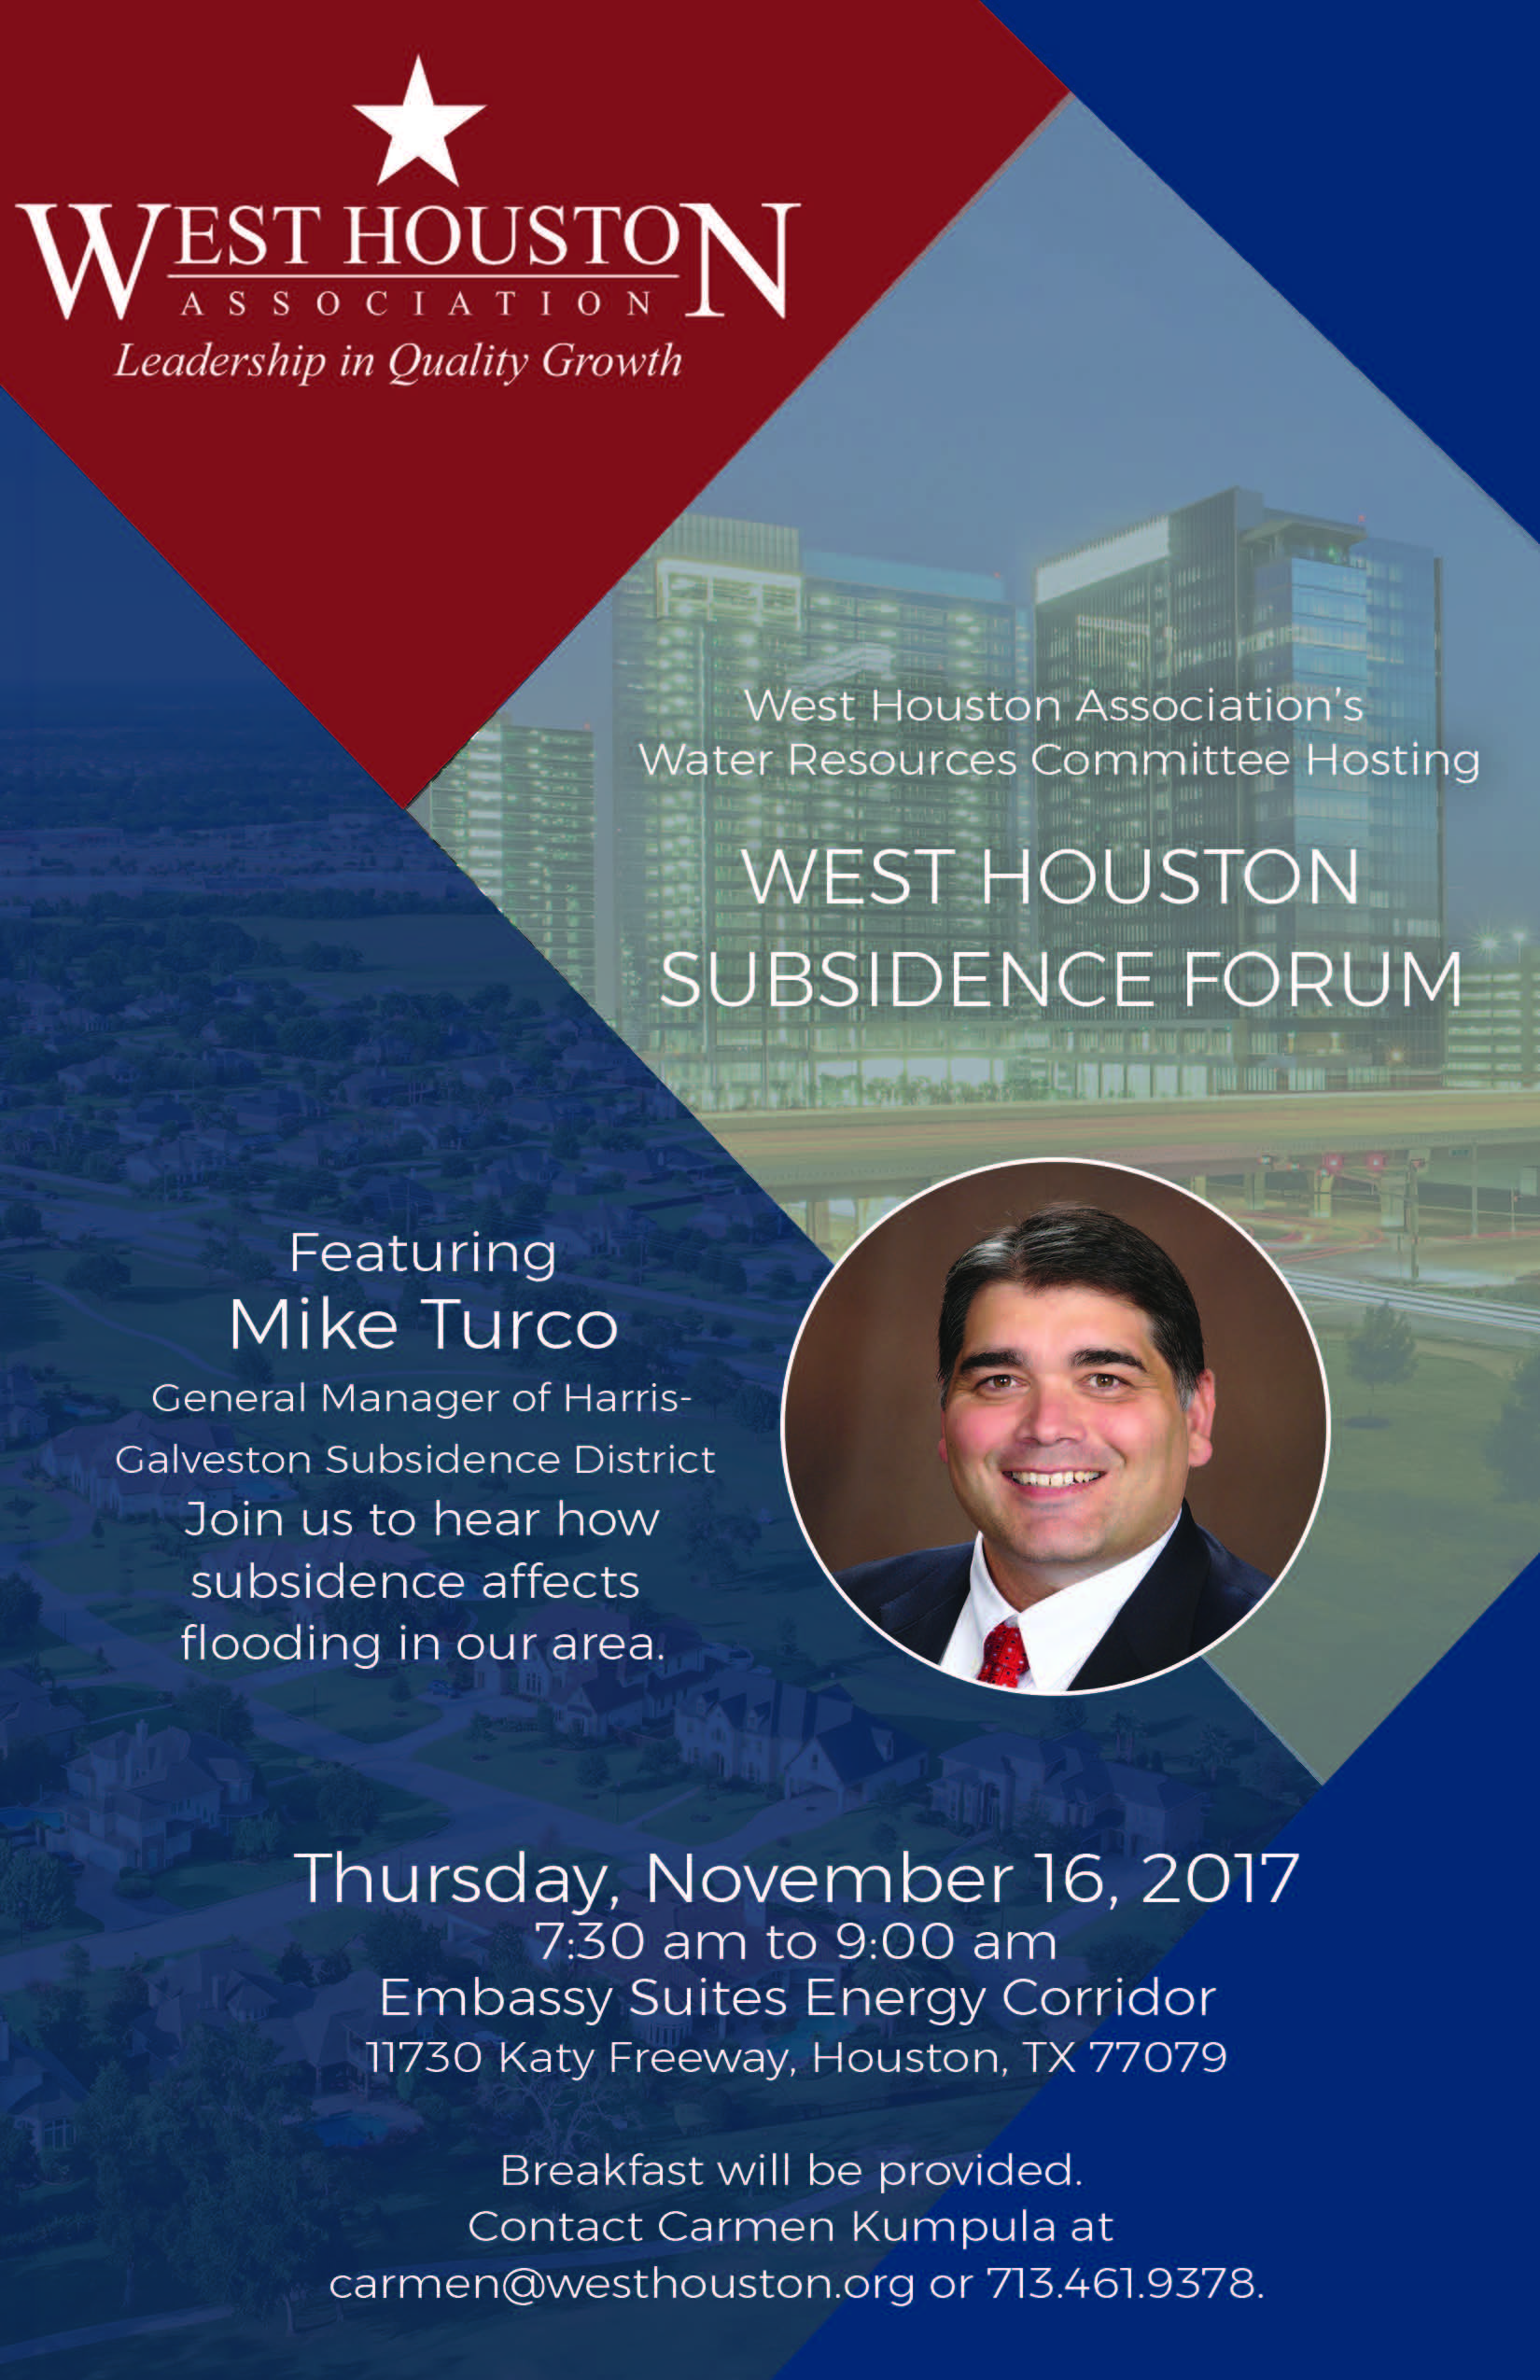 The WHA Water Resources Committee Hosted Mike Turco, General Manager of Harris-Galveston Subsidence District